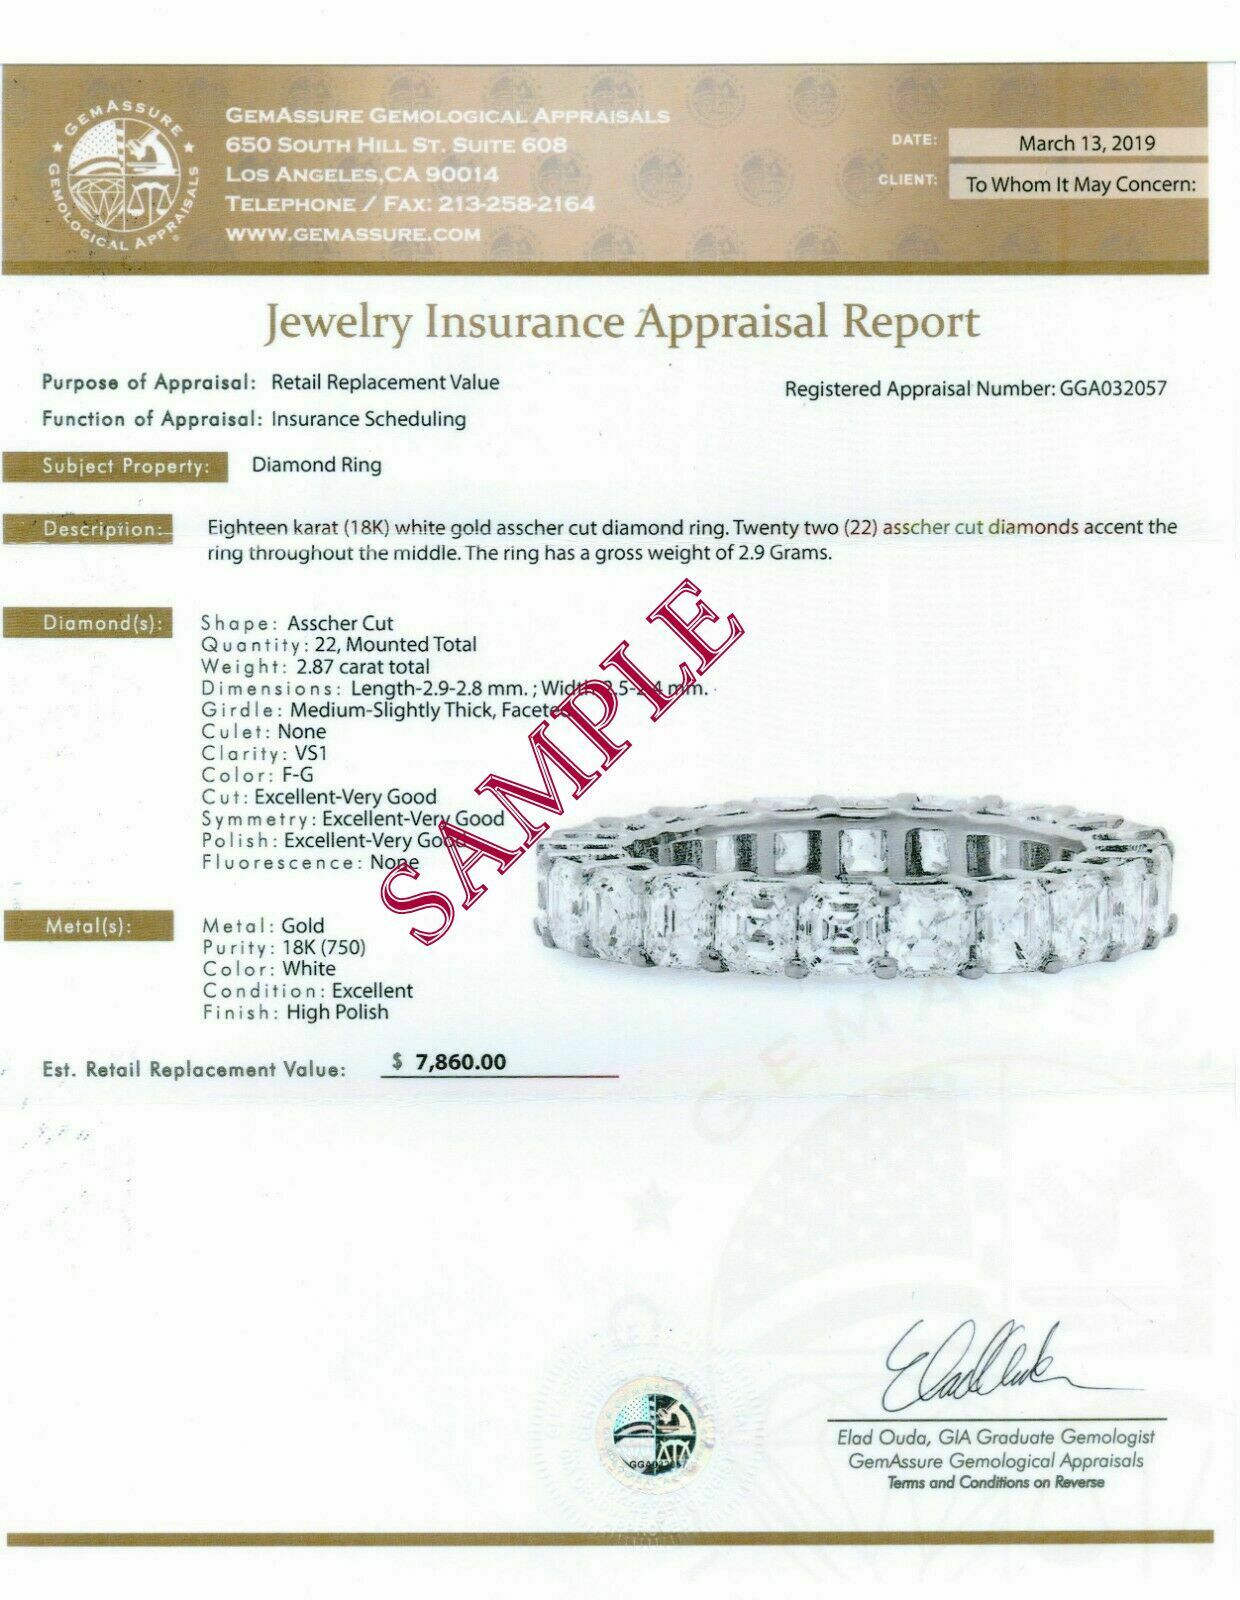 18K White Gold 1.73 CT Princess Round Eternity Diamond Ring Halo Band Natural Certified